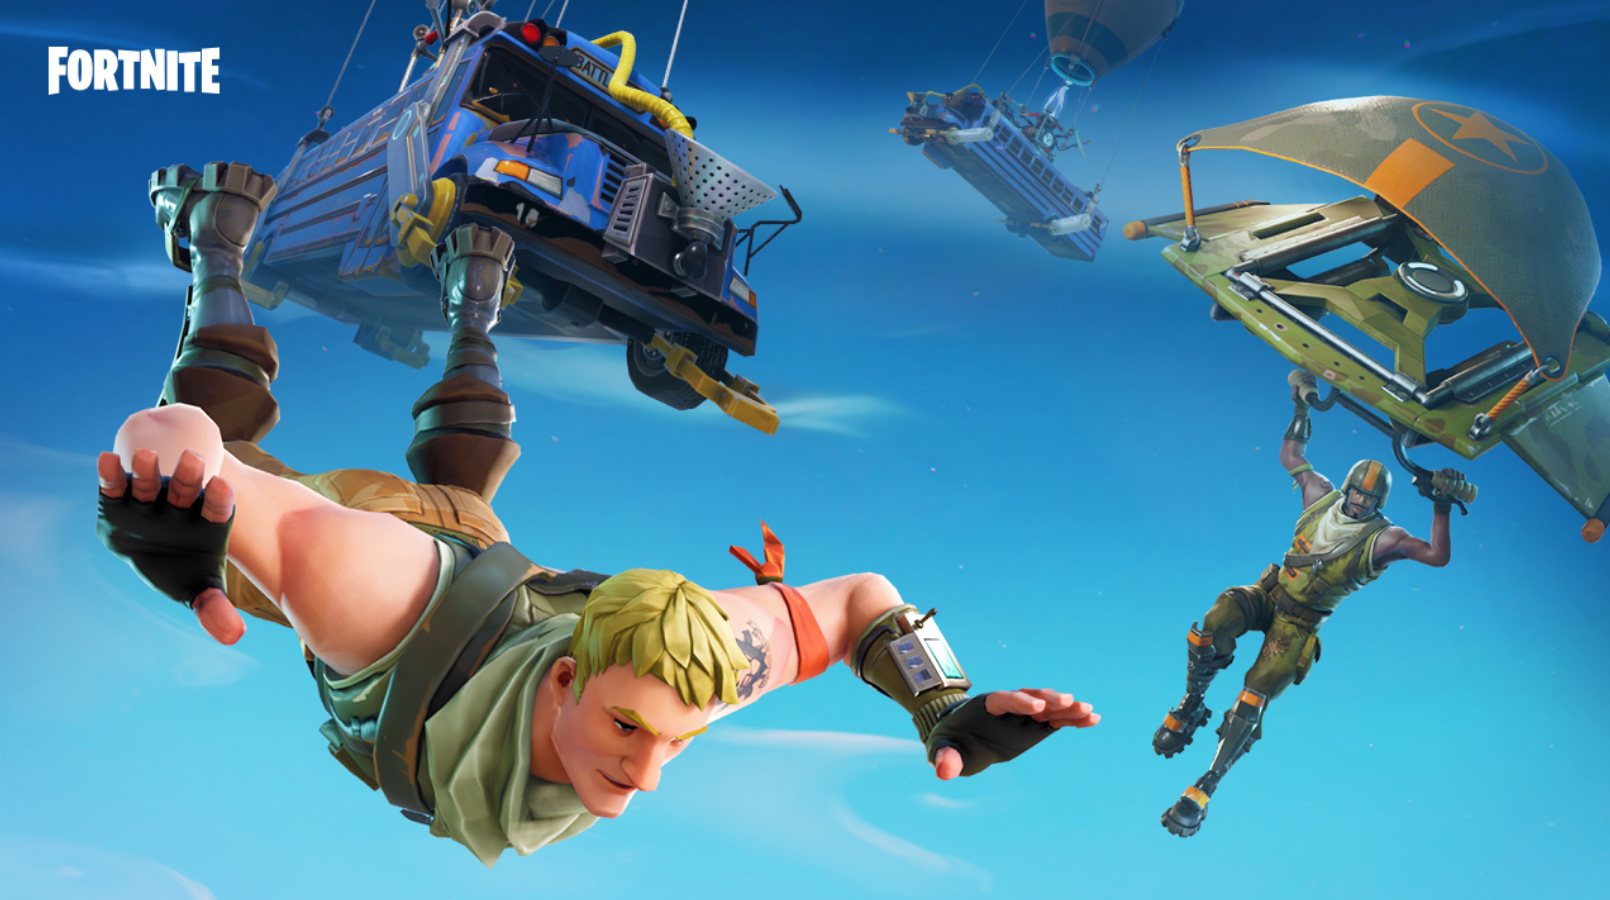 fortnite courses will teach teenagers how to make battle royale games inverse - fortnite summer camp los angeles